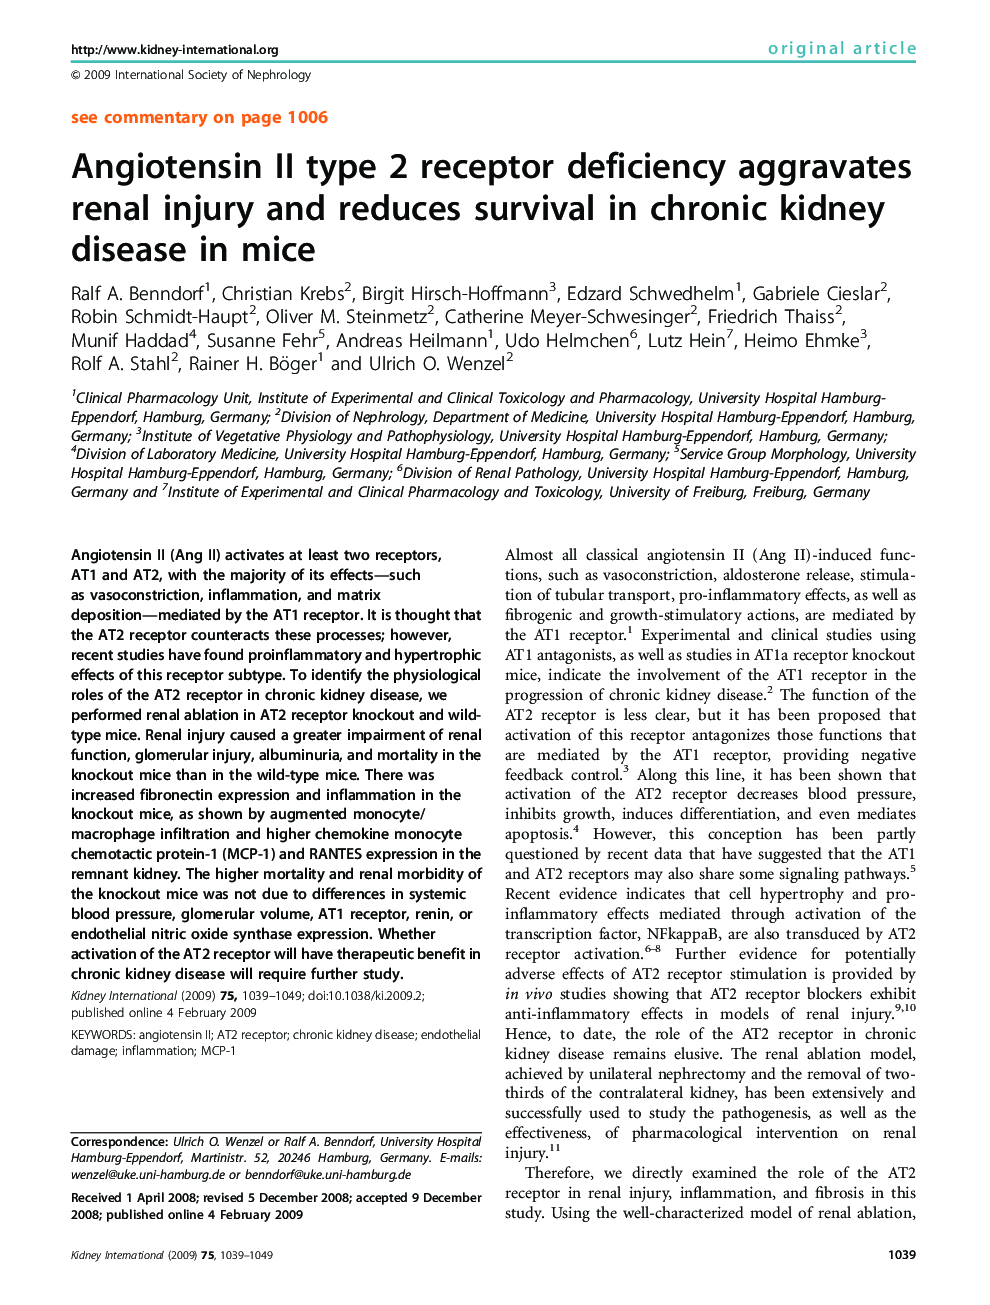 Angiotensin II type 2 receptor deficiency aggravates renal injury and reduces survival in chronic kidney disease in mice